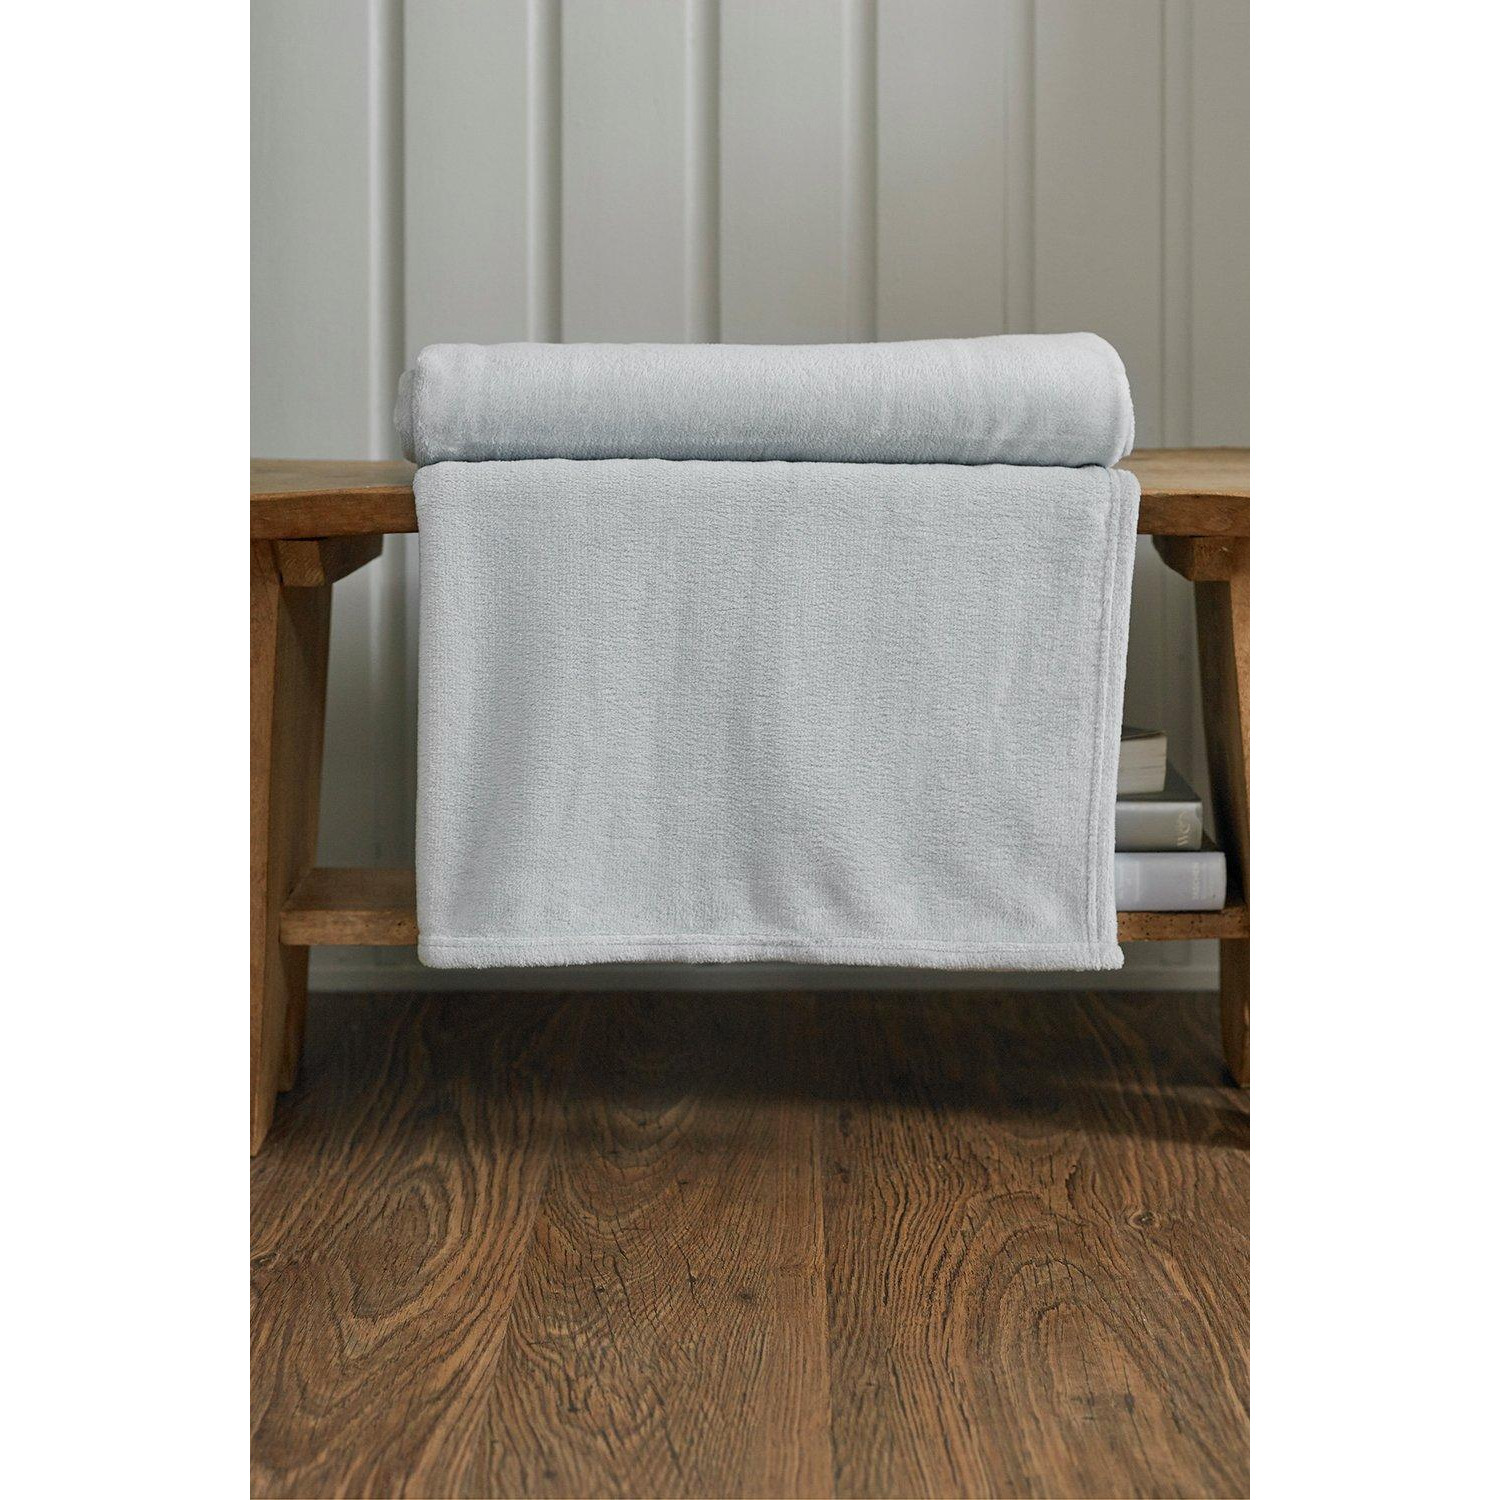 Snuggle Touch Microfibre Throws 180x250cm - image 1